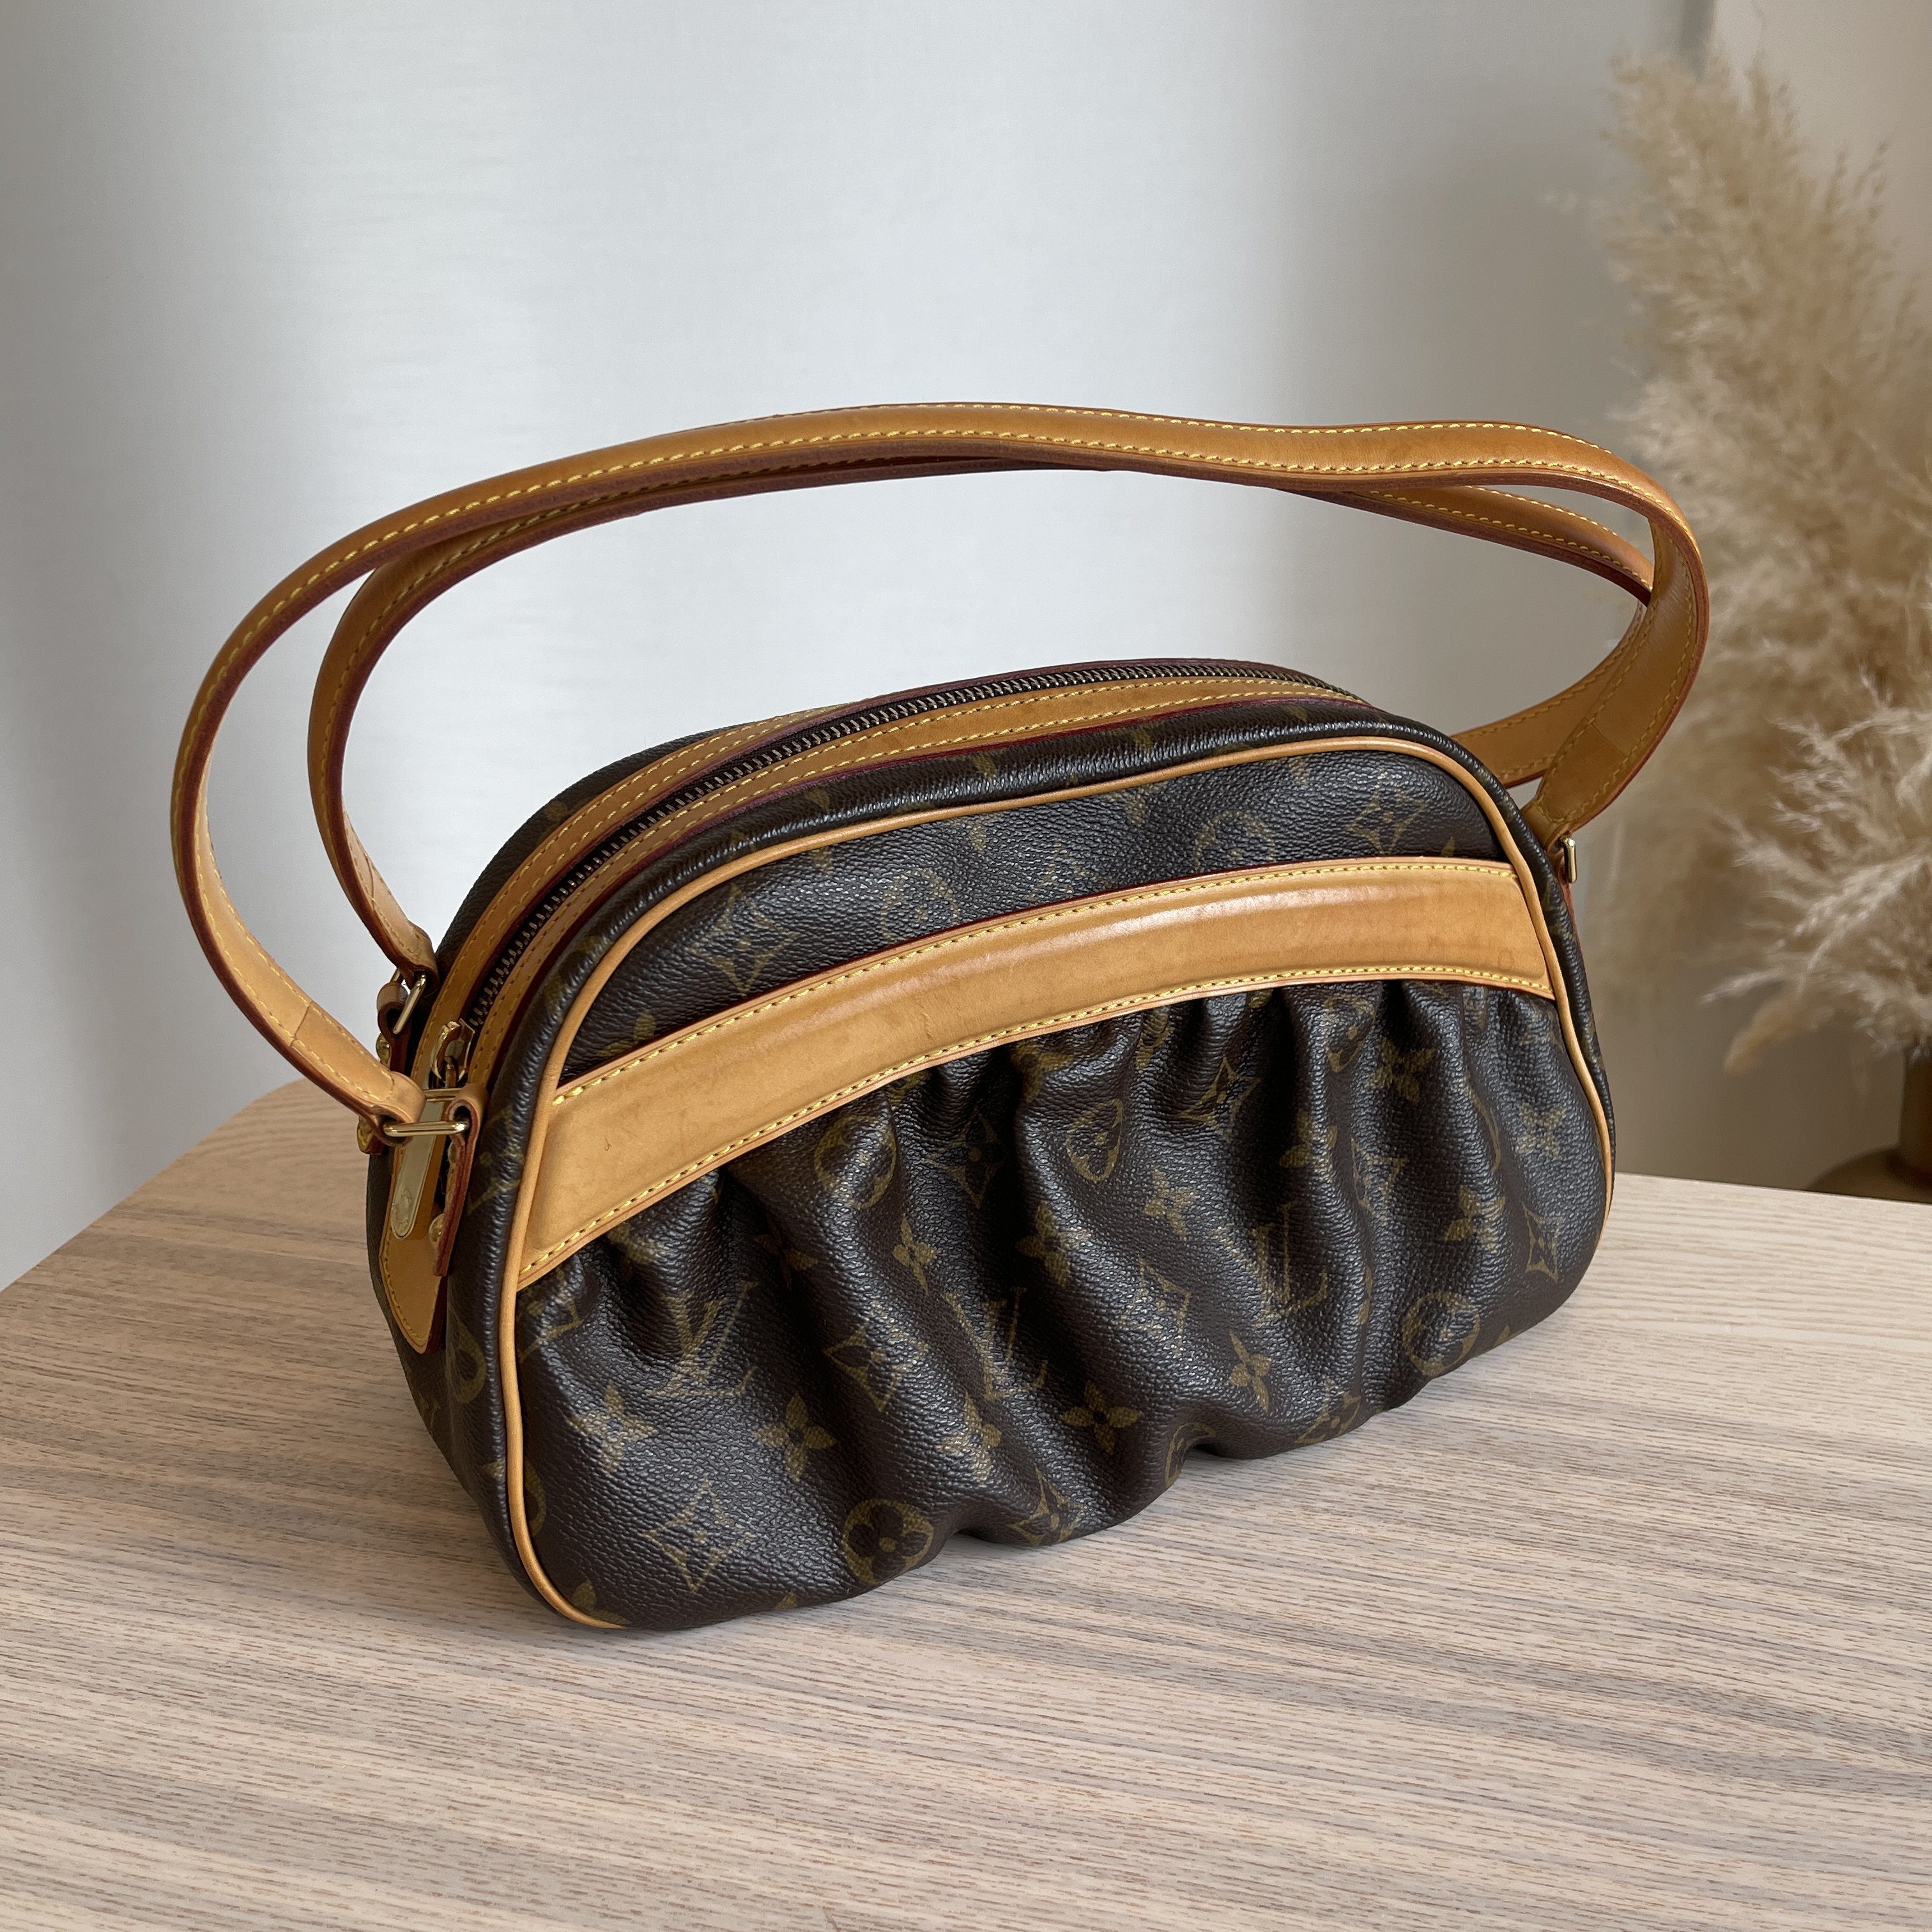 This vintage Louis Vuitton bag will be the coolest fashion